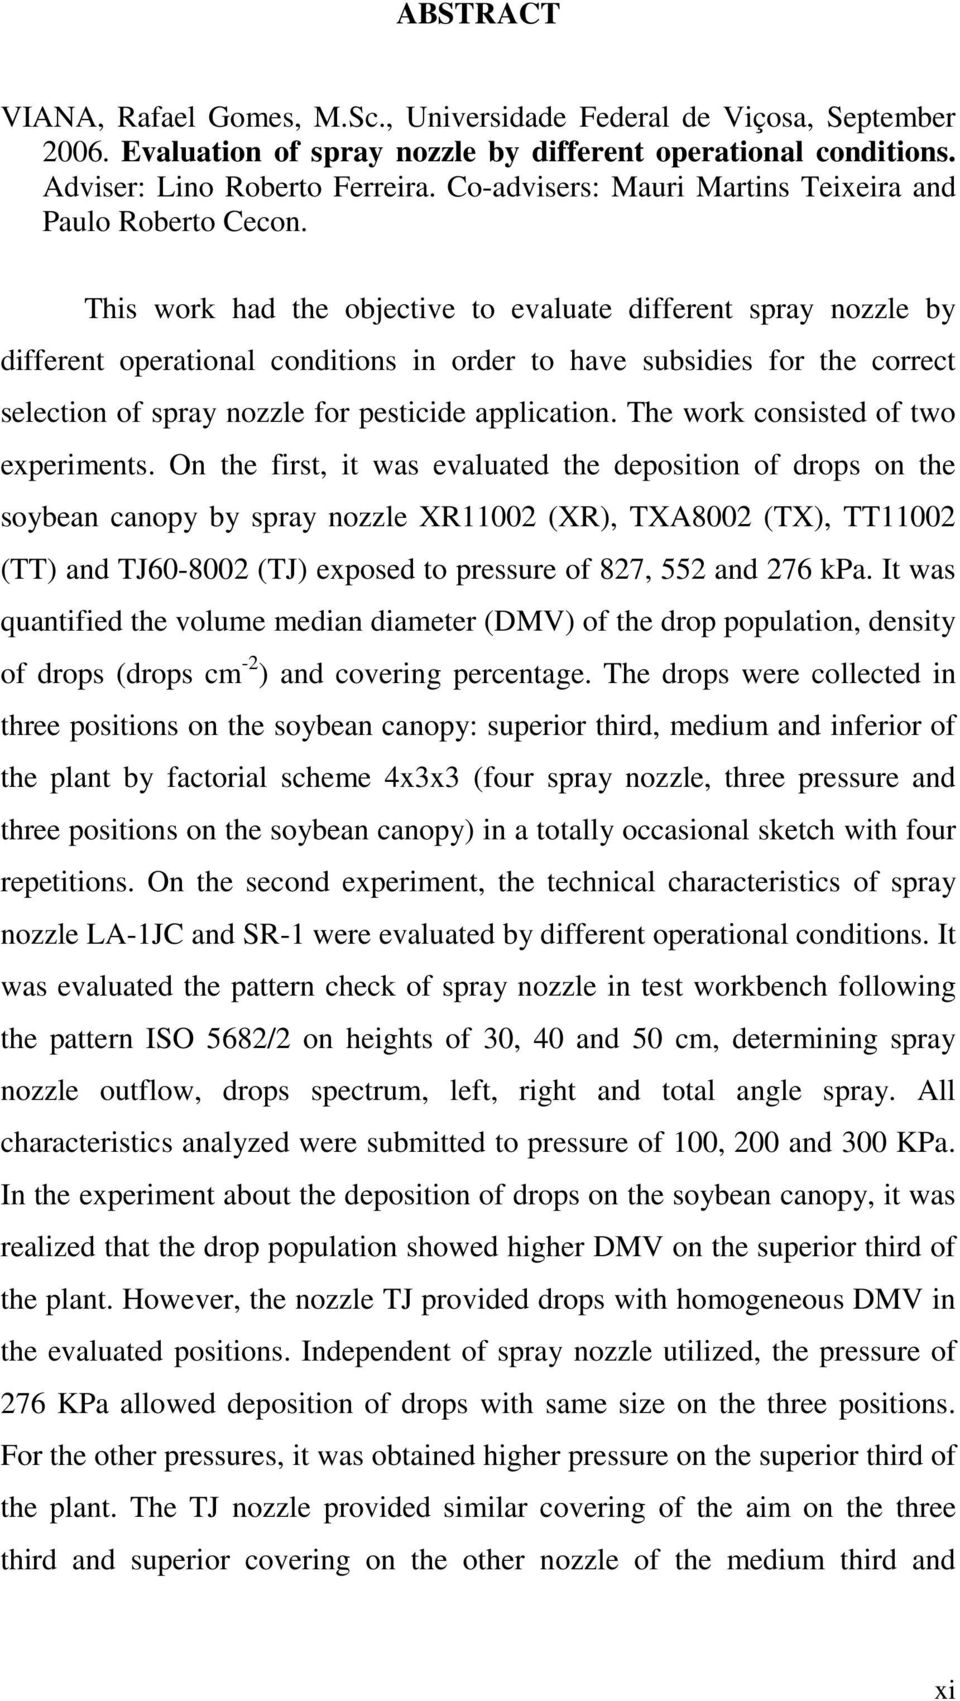 This work had the objective to evaluate different spray nozzle by different operational conditions in order to have subsidies for the correct selection of spray nozzle for pesticide application.